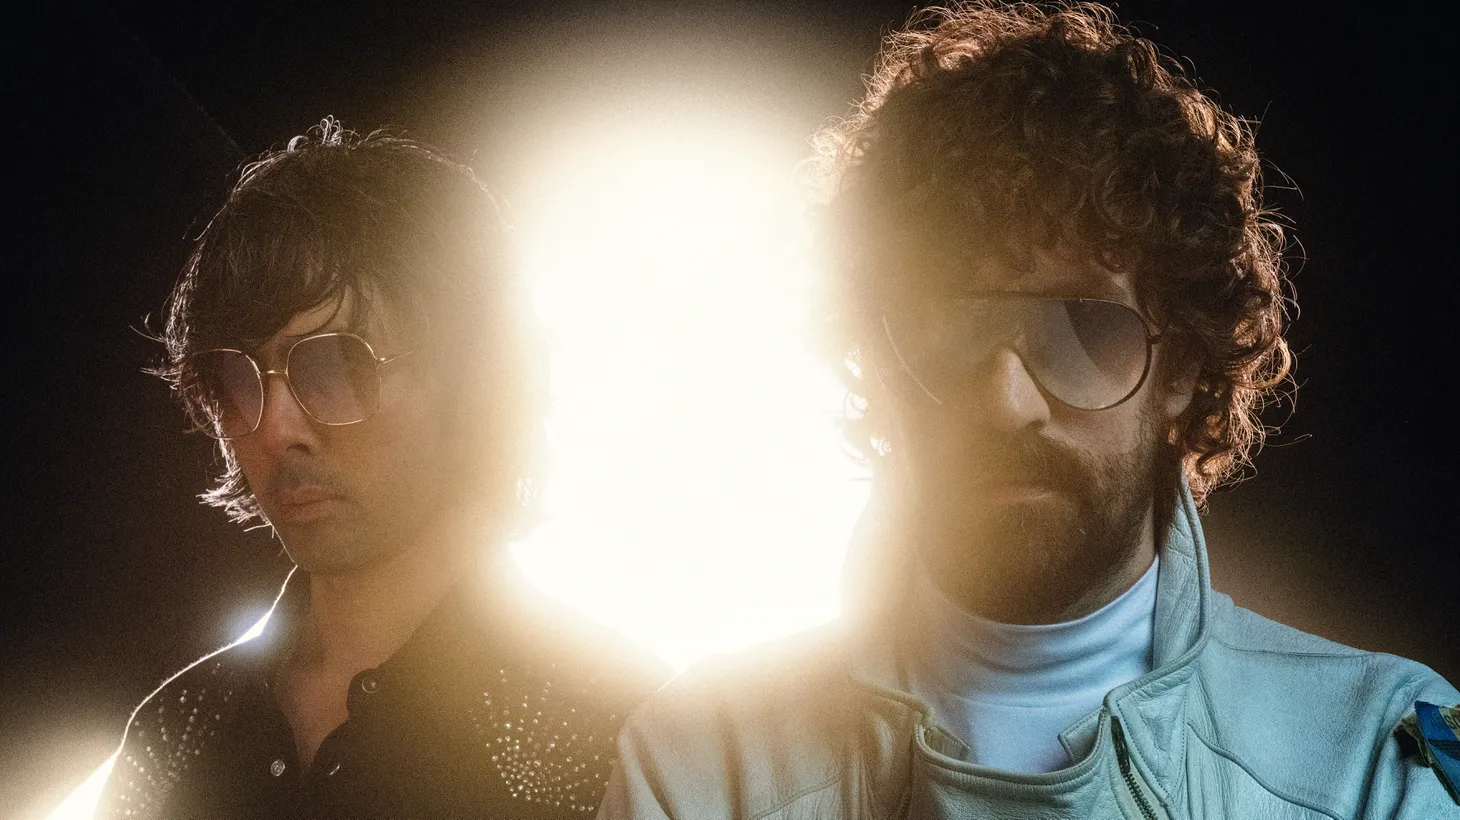 We are counting down the days to the new album Hyperdrama from Justice , dropping April 26. Their brand of dark techno has flashes of disco/funk and electronica with sweeping cinematic arrangement, exemplified to the max on “Generator.”